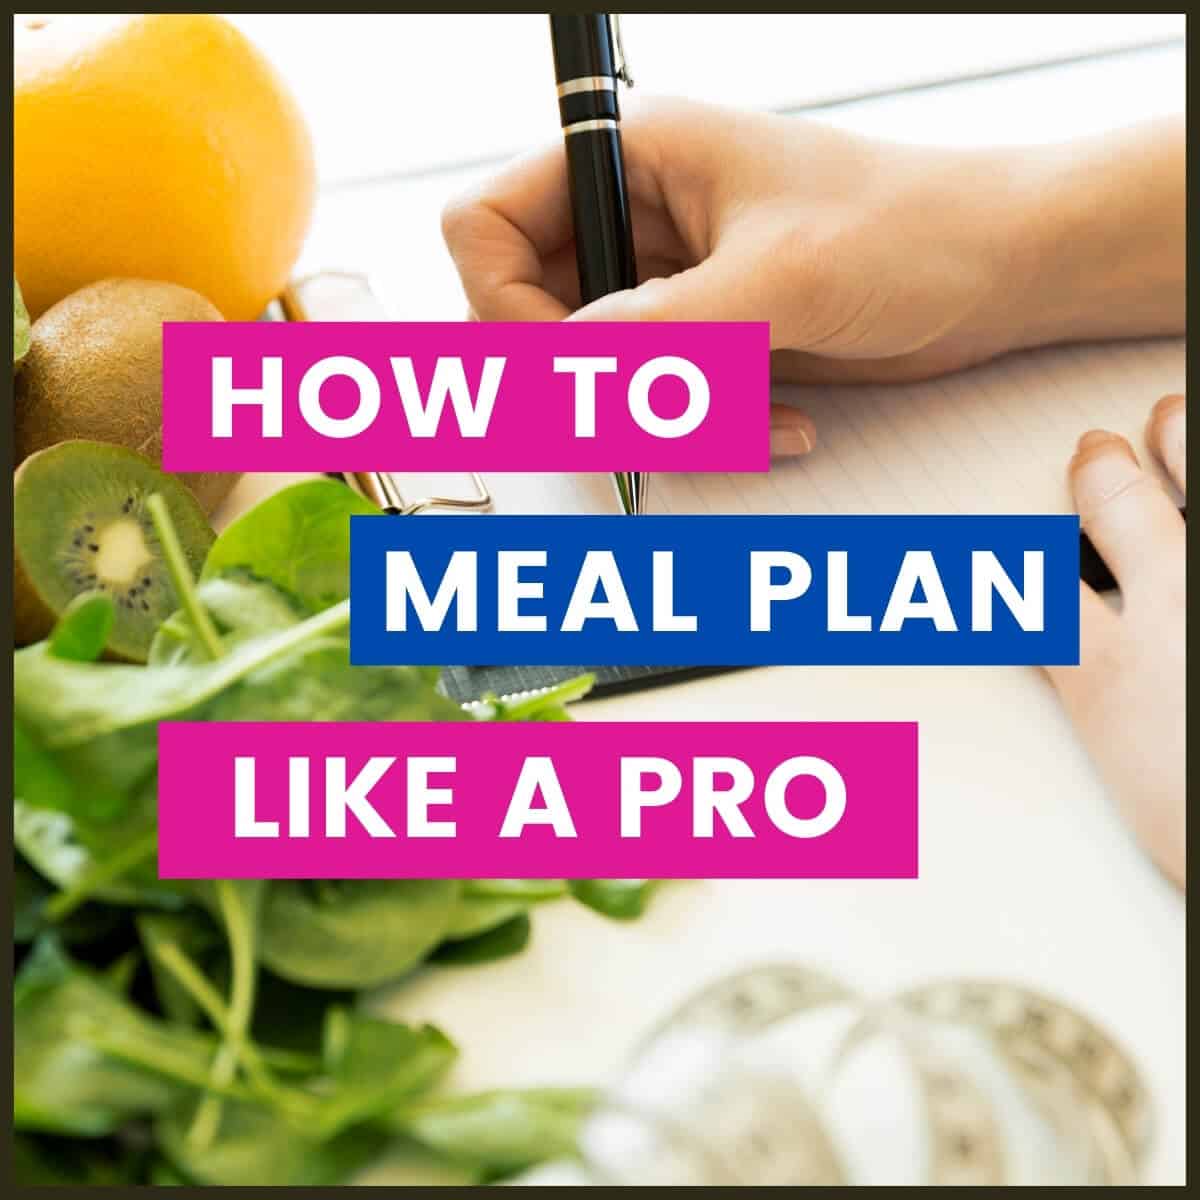 How to meal plan – A complete guide